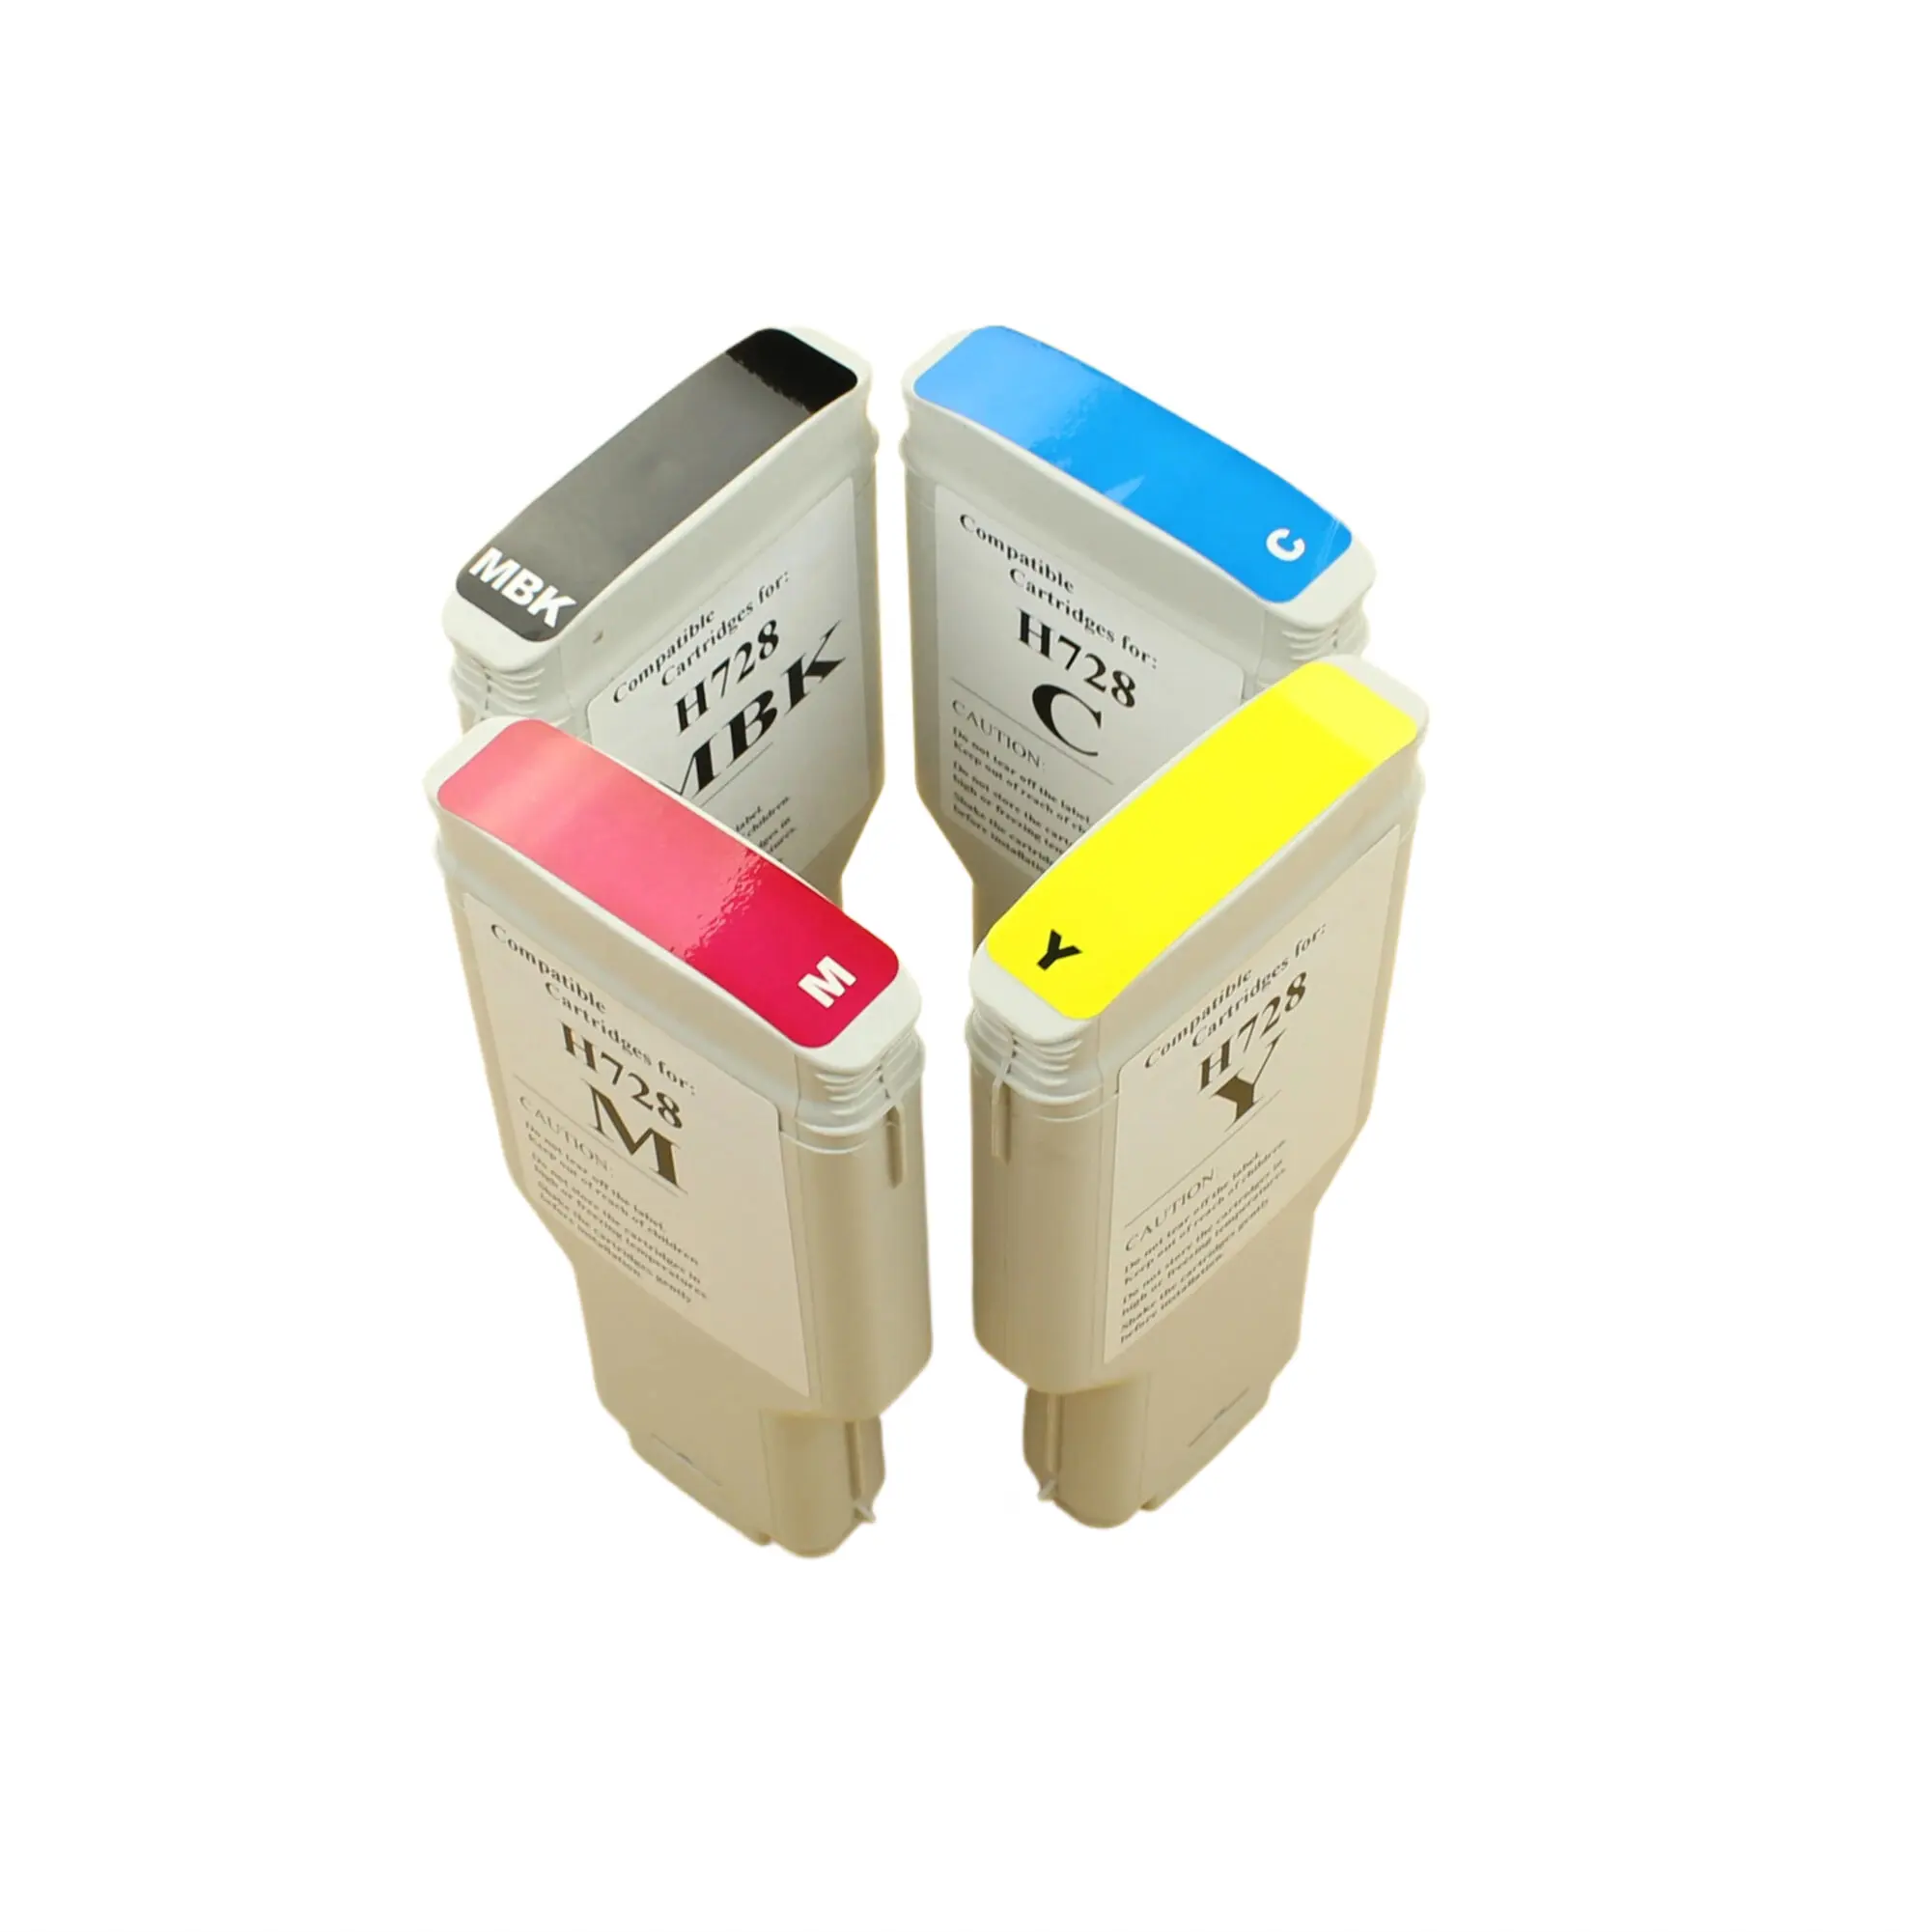 300ML Empty cartridge For HP 728 ink cartridge For HP DesignJet T730 T830 Printer With latest one time chip